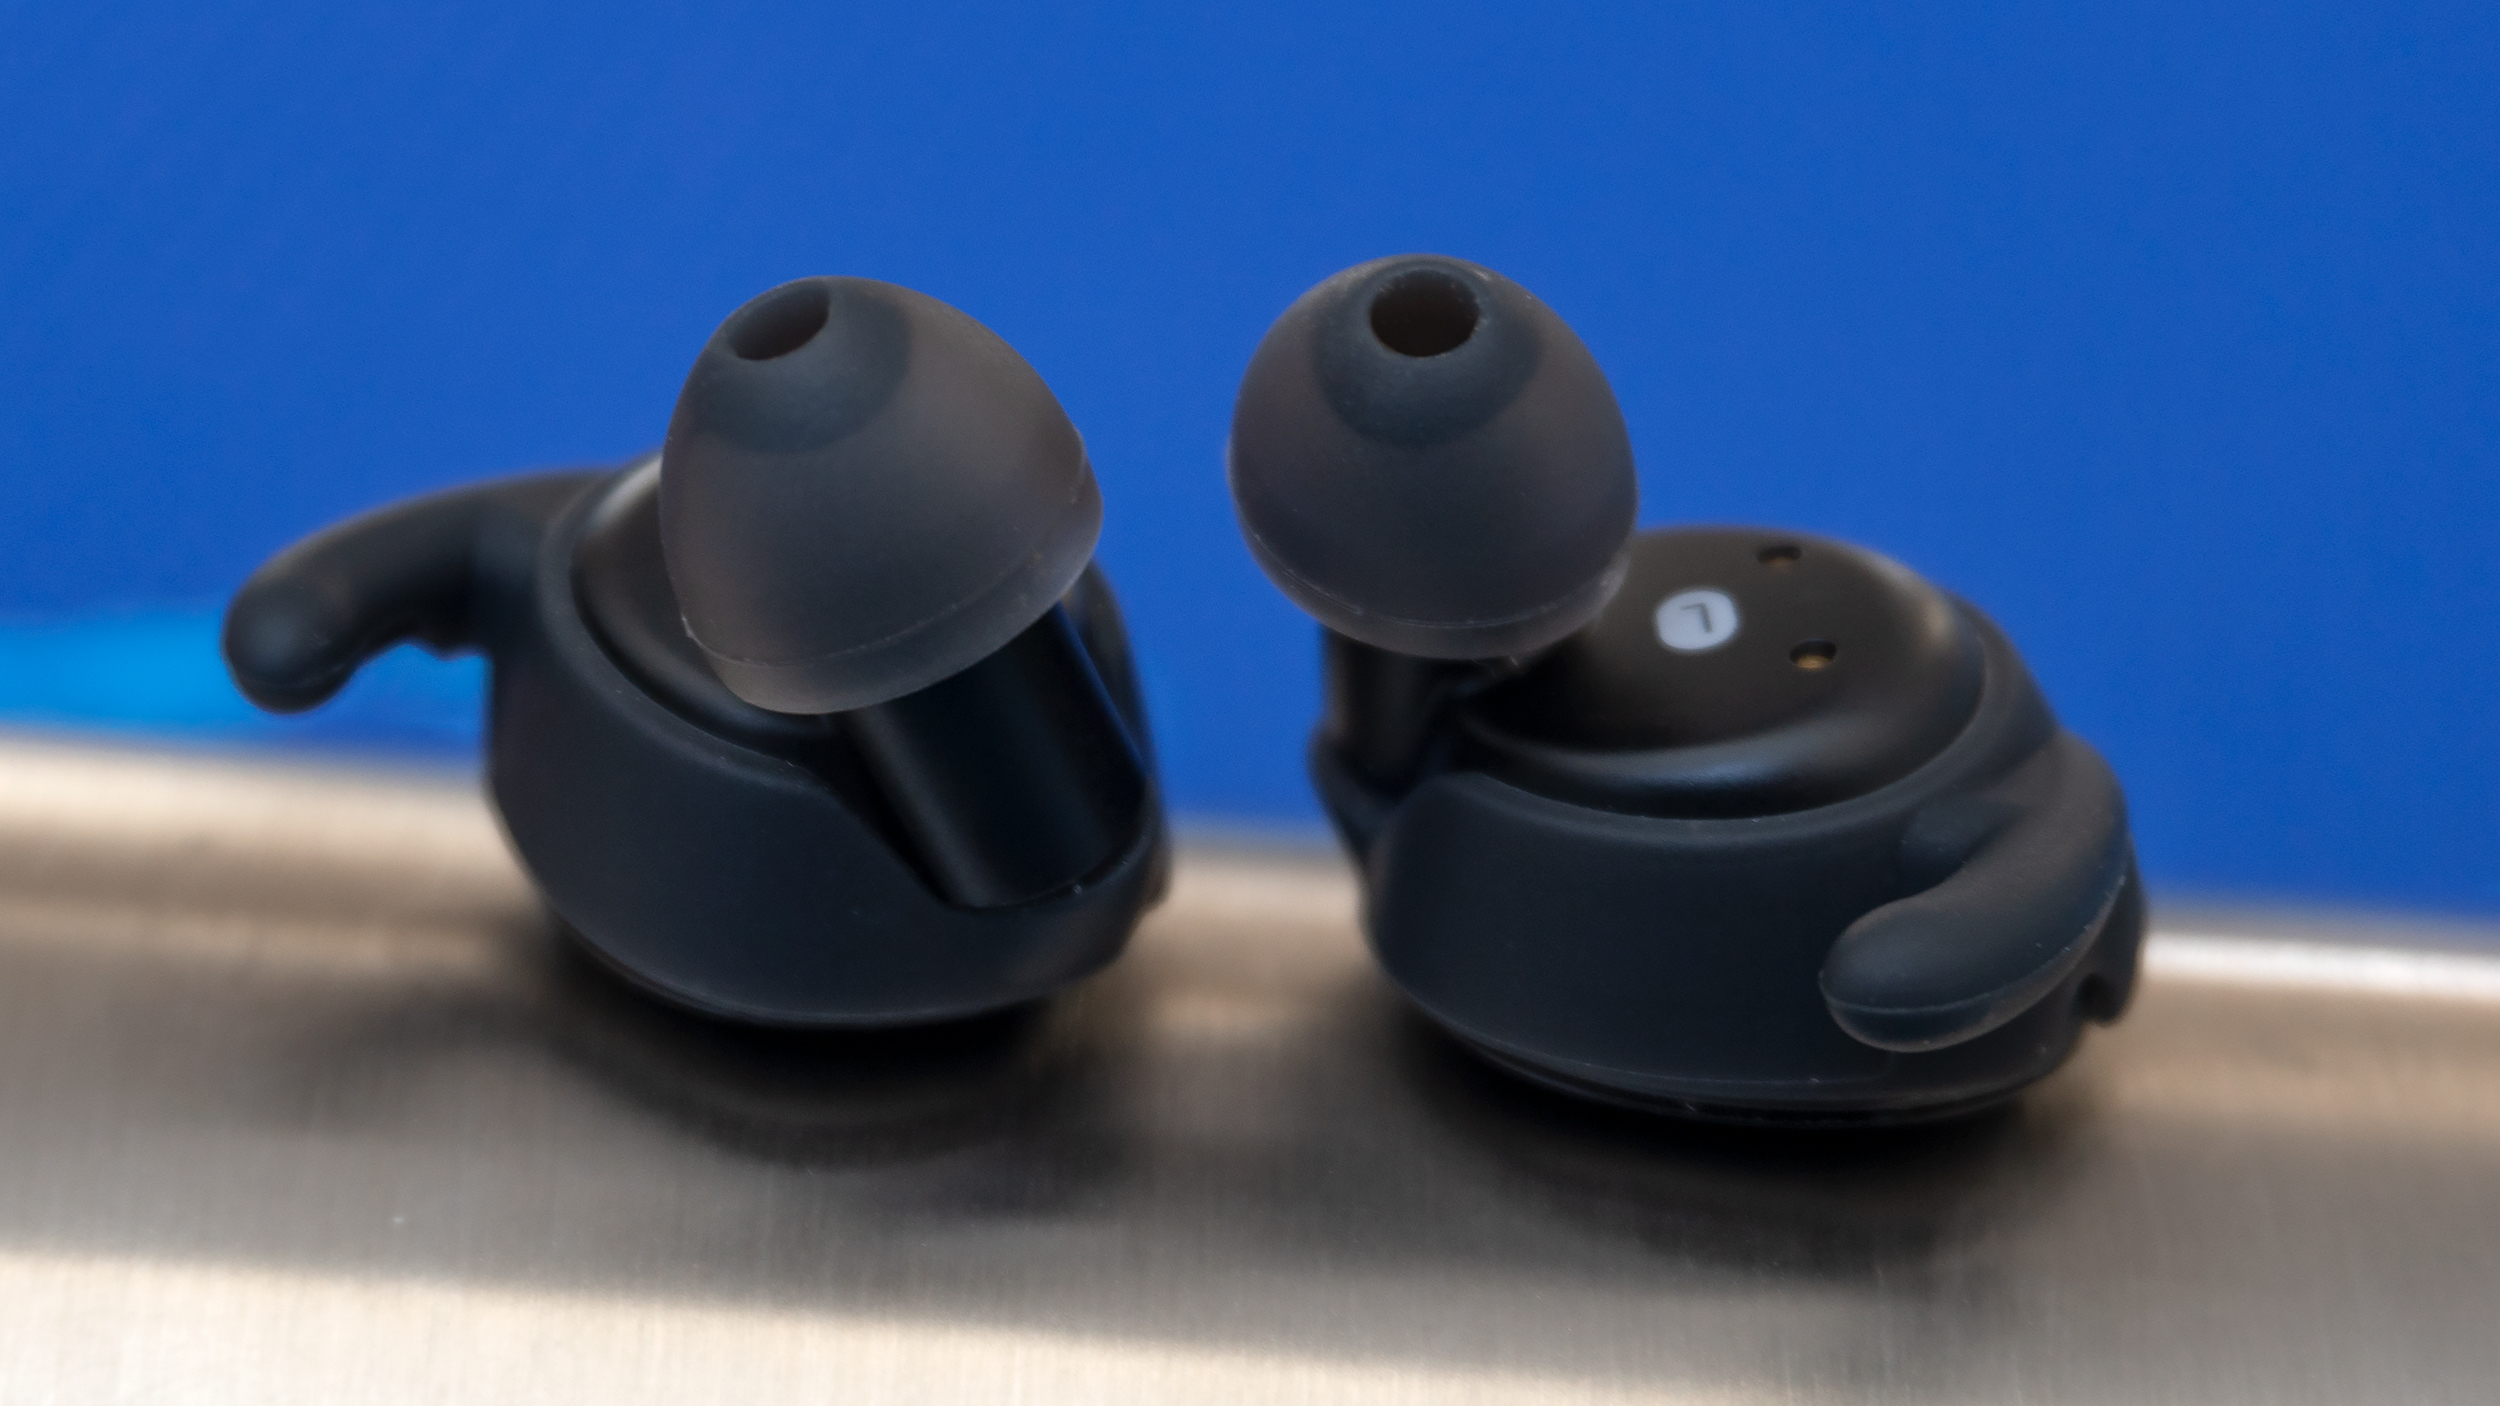 The Klipsch T5 II True Wireless Sport earbuds also includes three sets of ear wings in different sizes which are crucial for keeping buds in while physically active, but unfortunately the swappable wings tend to easily fall off the buds. (Photo: Andrew Liszewski/Gizmodo)